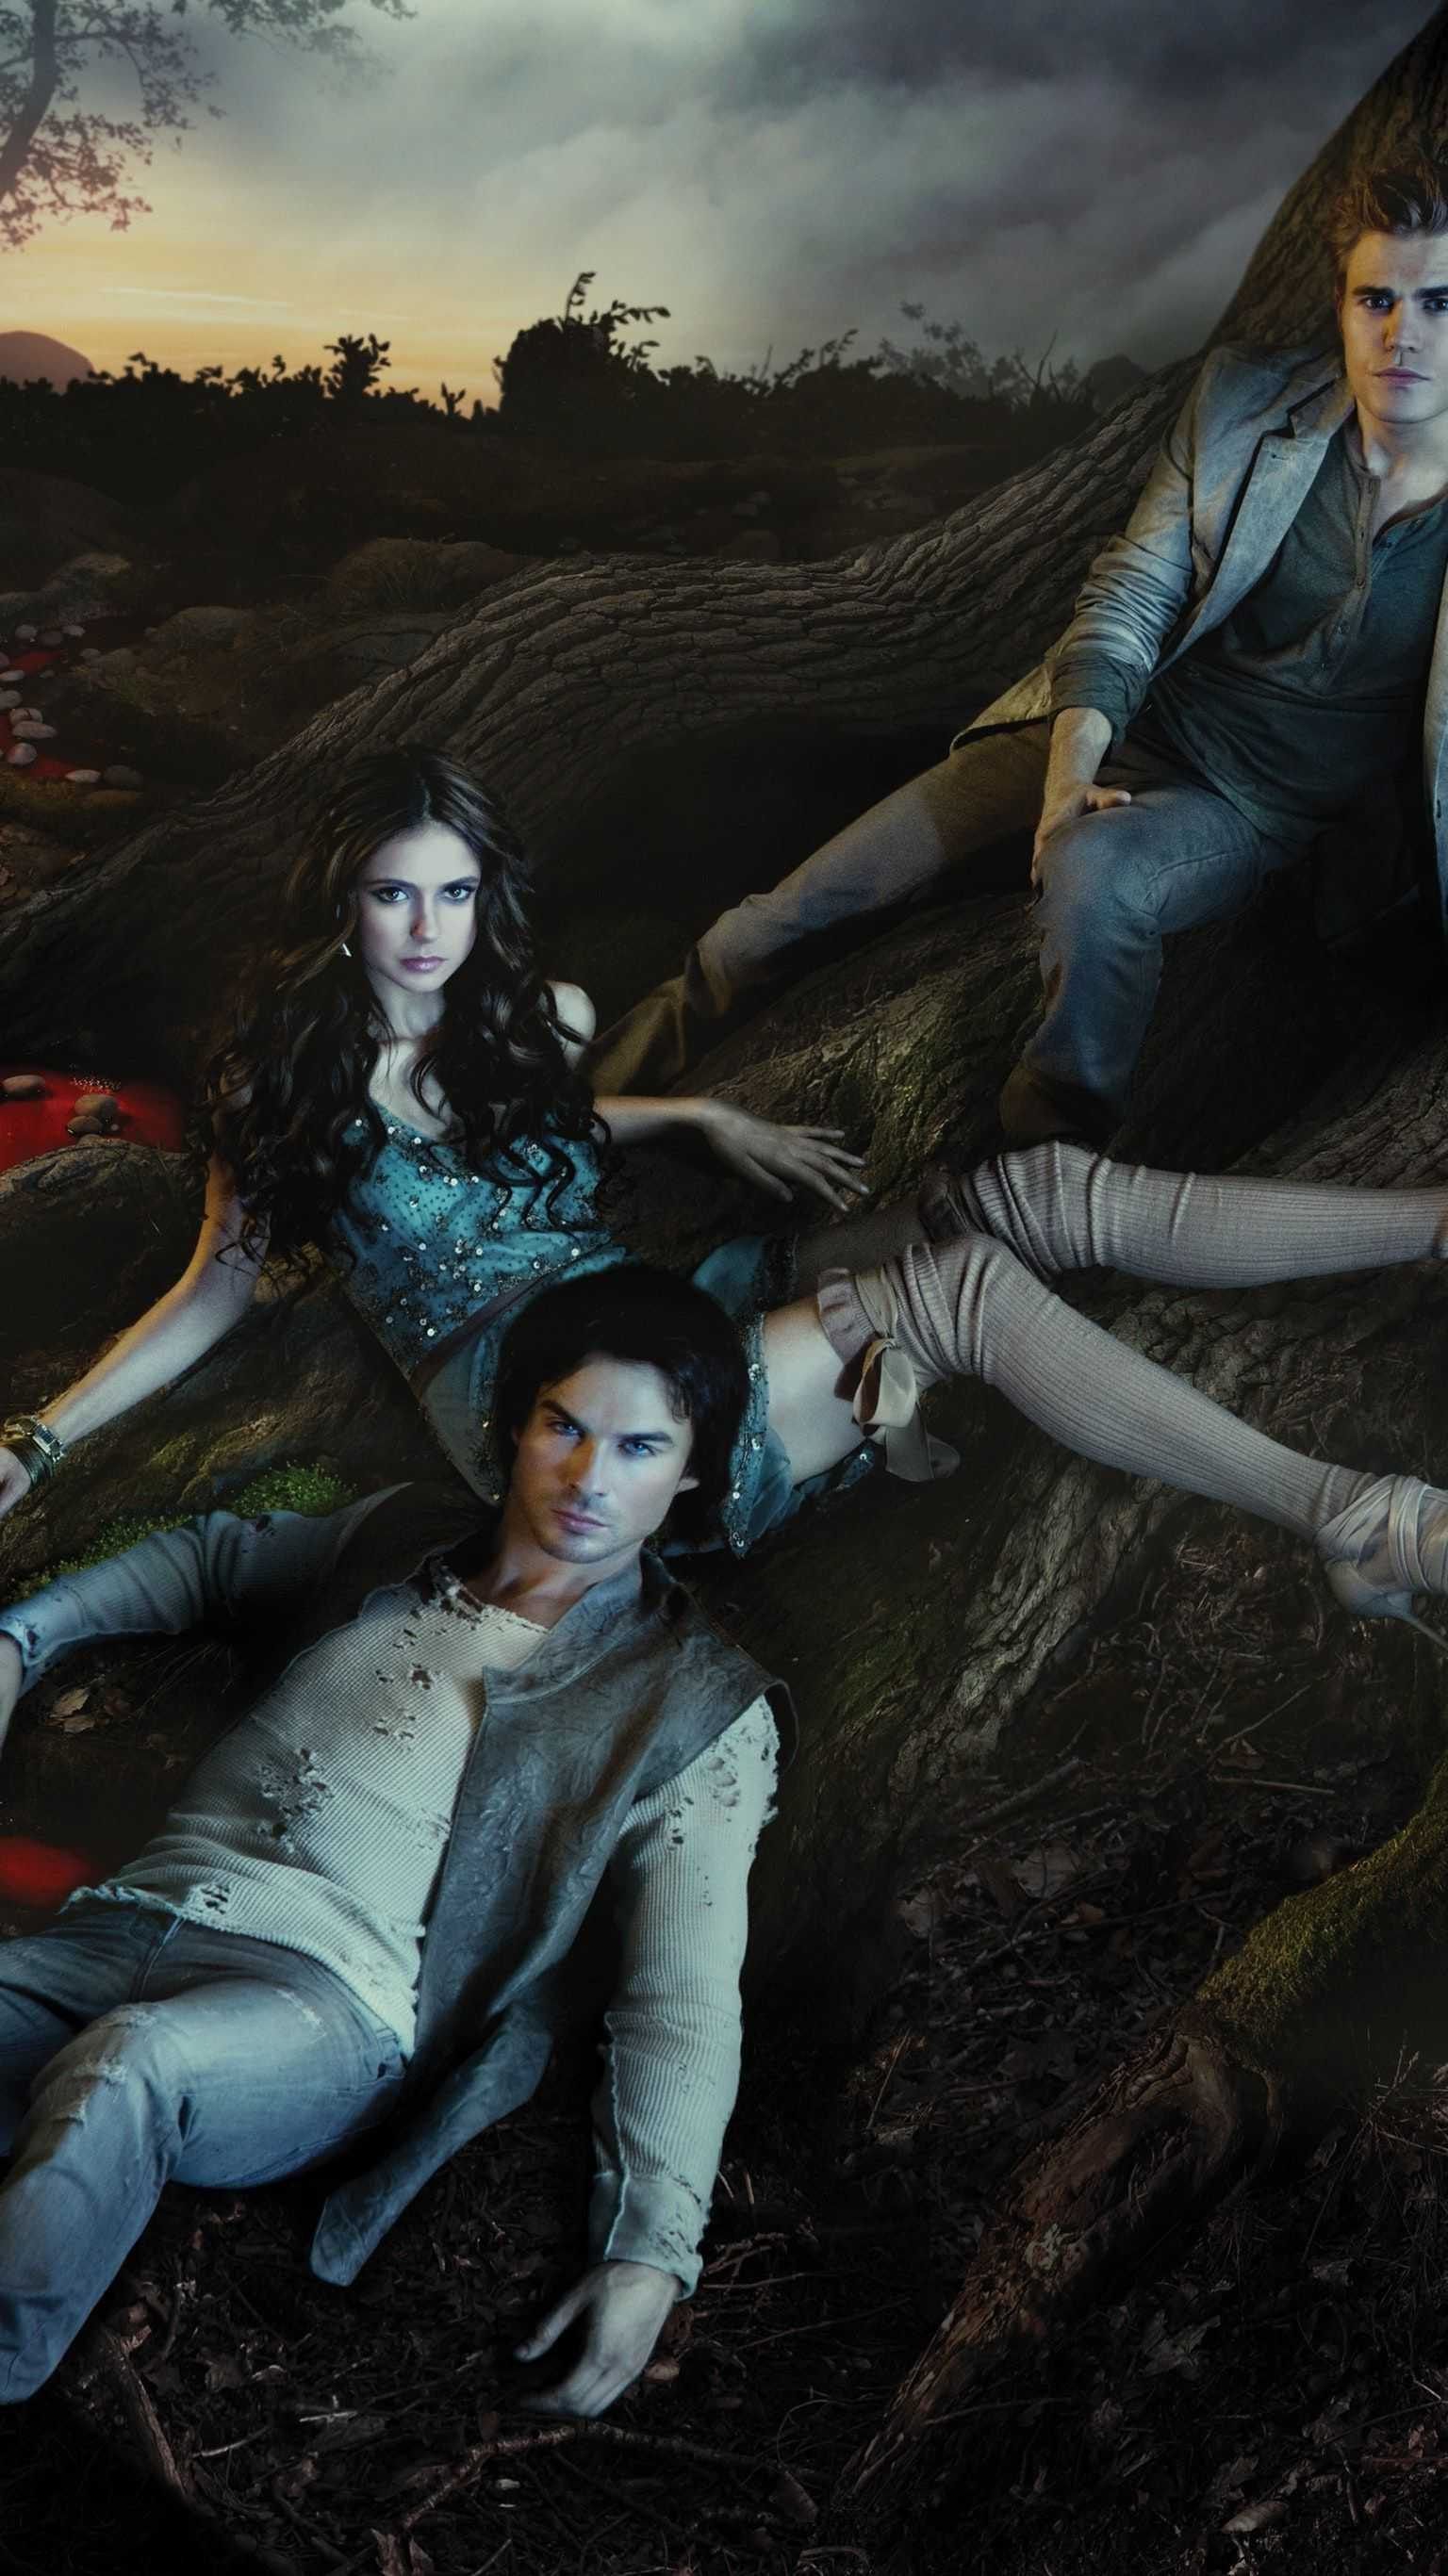 The vampire diaries poster with a group of people - Vampire